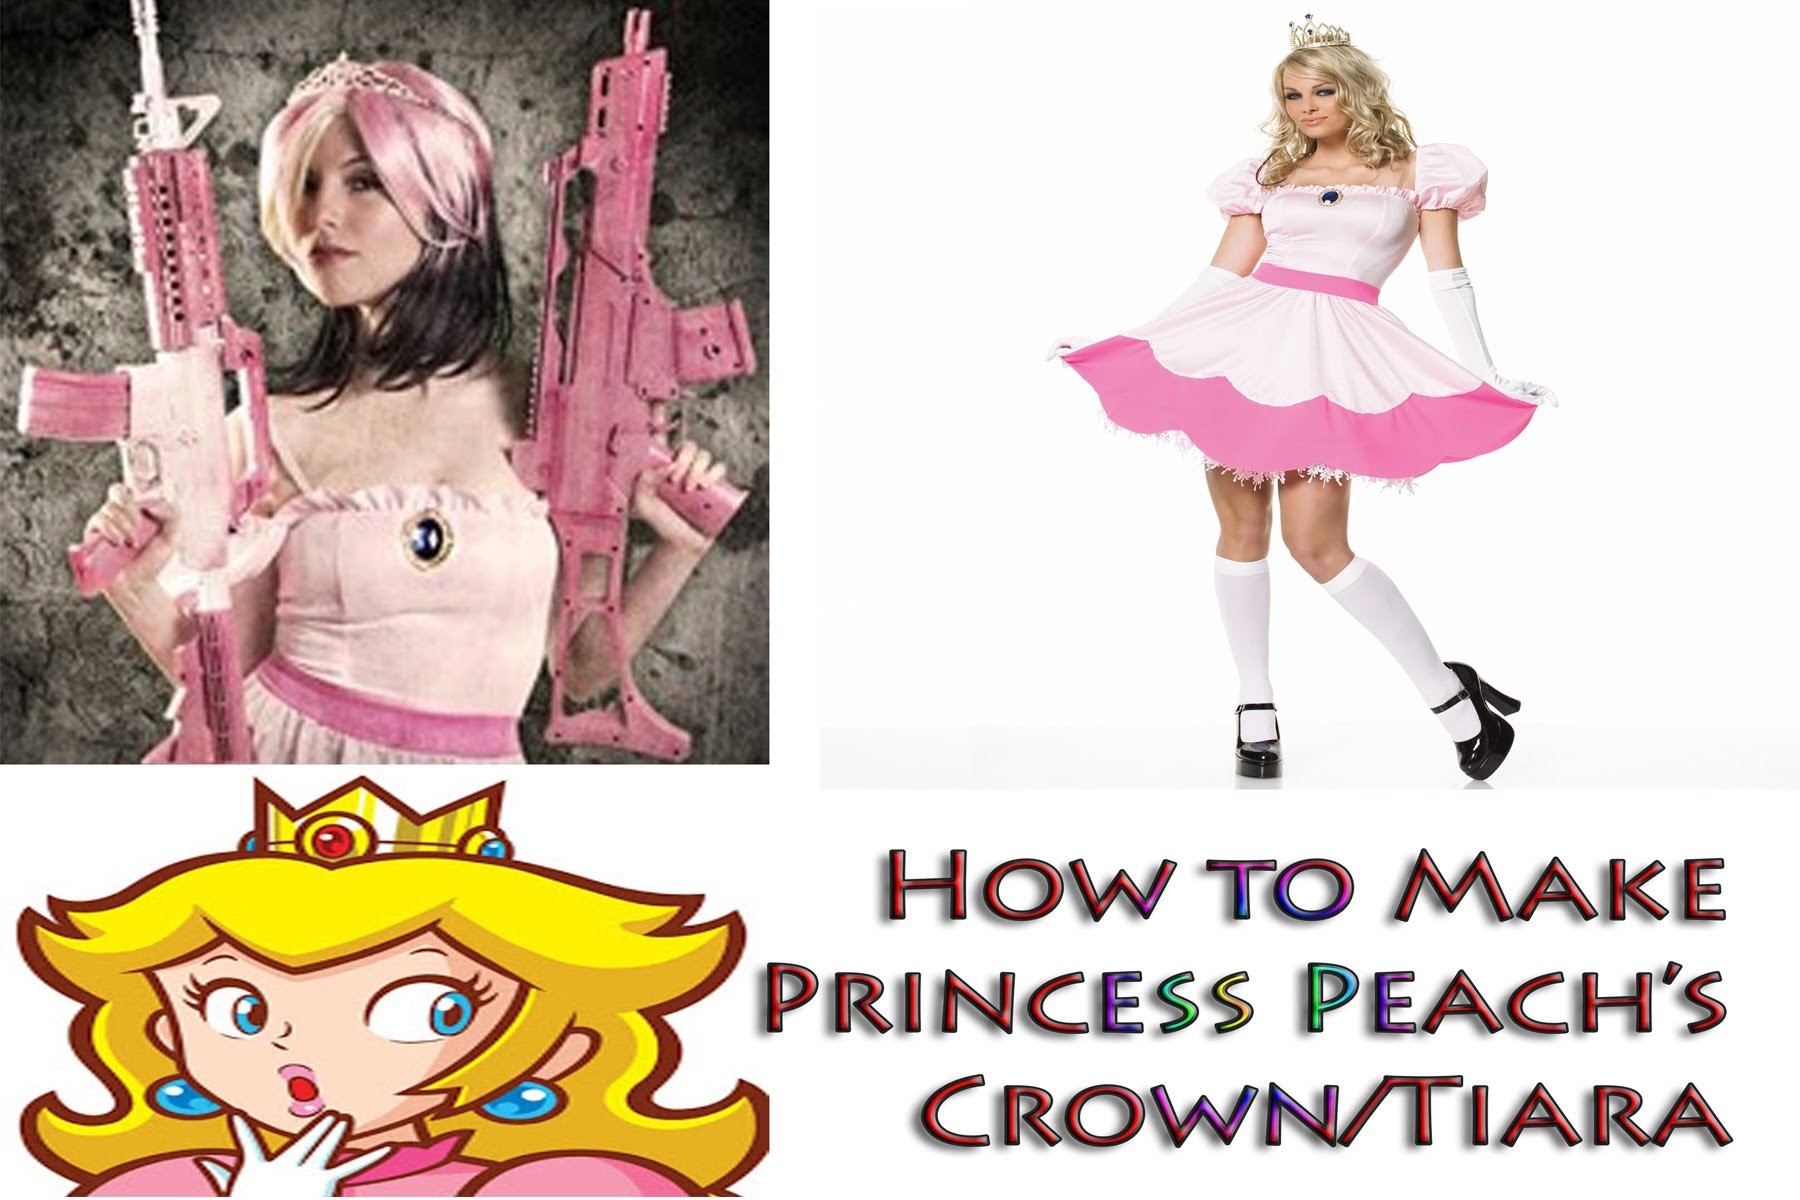 How,to,Create,Your,own,Princess,Peach,Crown,For,Halloween,me,My,boyfriend,a...